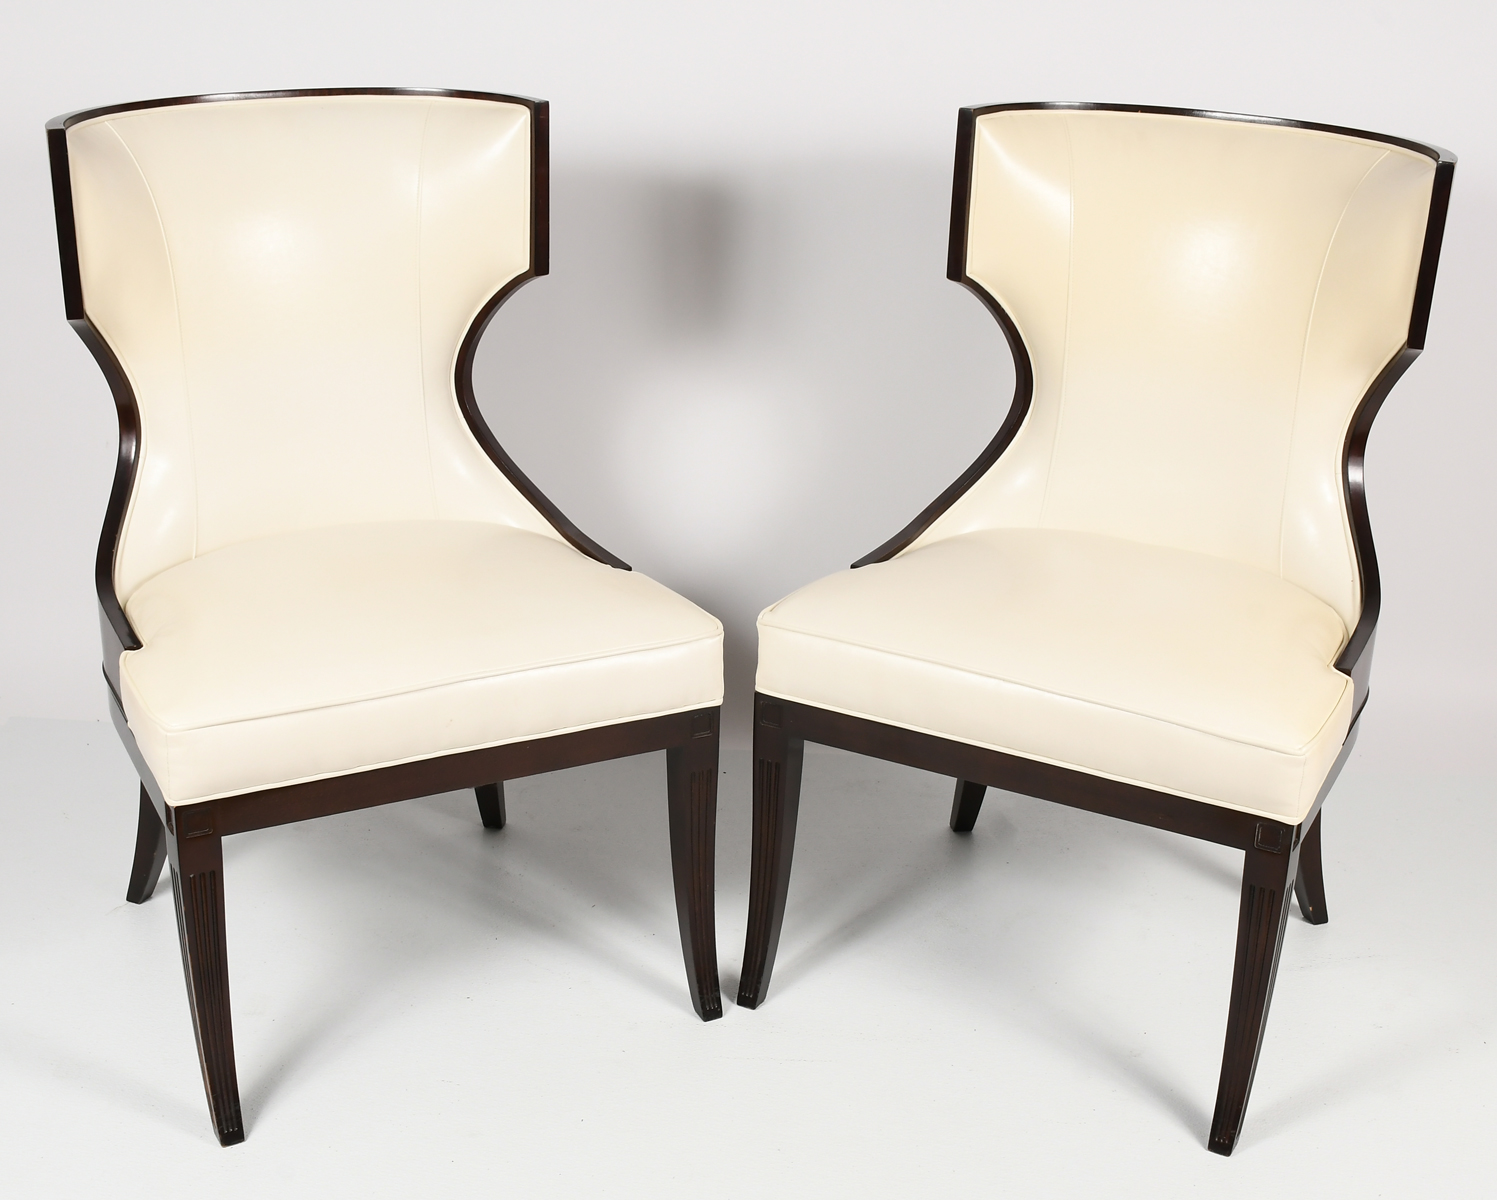 PAIR OF MODERN LEATHER WINGBACK